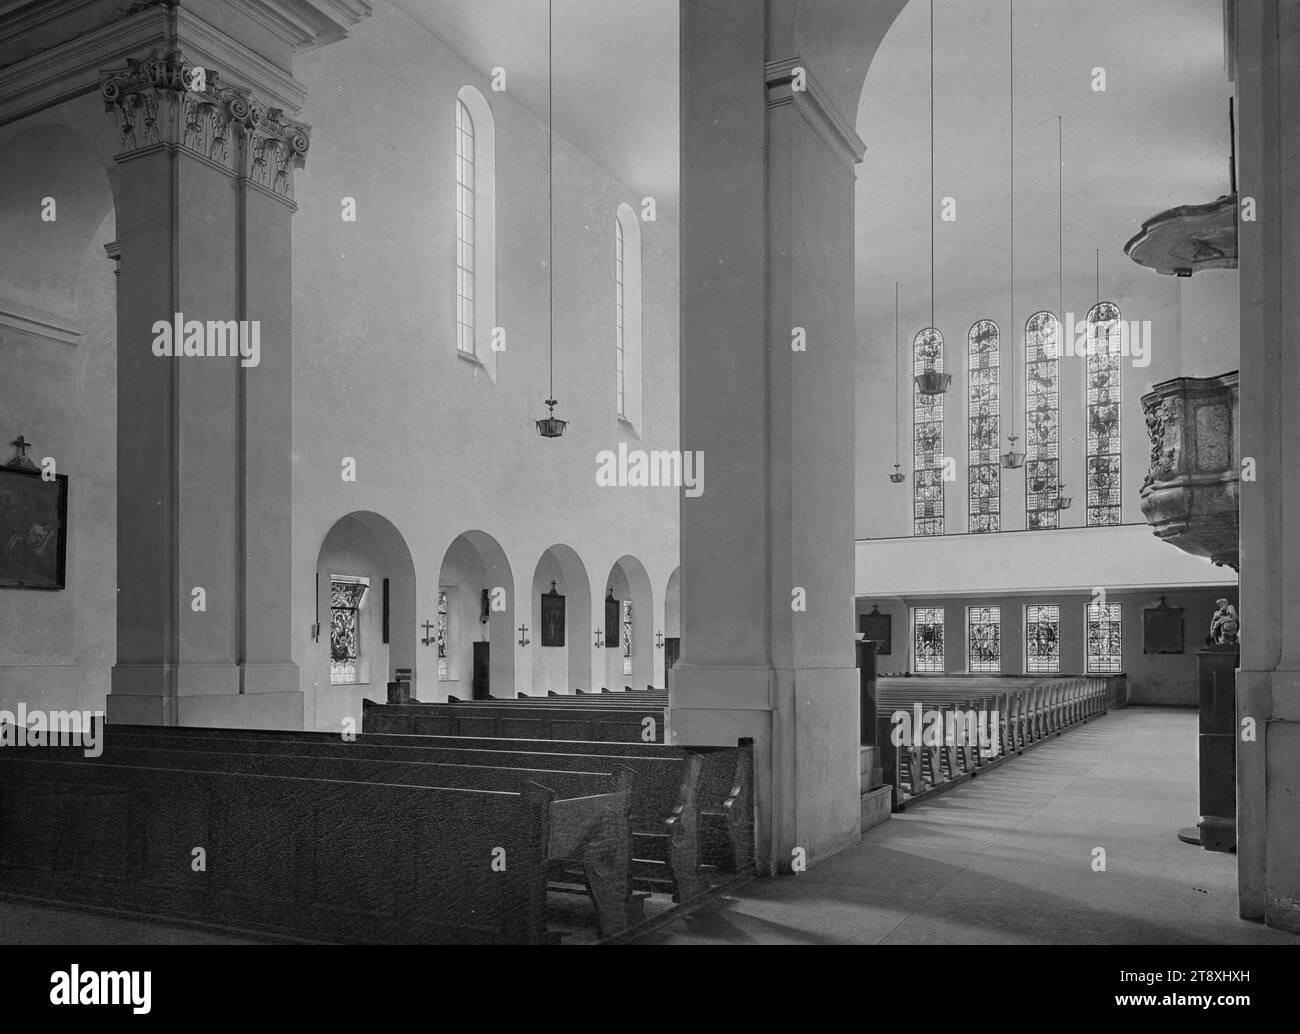 Parish Church of St. Gertrud (18th, Währinger Strasse 95), interior view, Martin Gerlach Jr. (1879-1944), photographer, Karl Holey (1879-1955), architect, dated c. 1934-1936, glass, negative, height 17.8 cm, width 23.8 cm, architecture, 18th district: Währing, church interior, Währinger Parish Church of St. Gertrud, interior  depiction of a building, The Vienna Collection Stock Photo